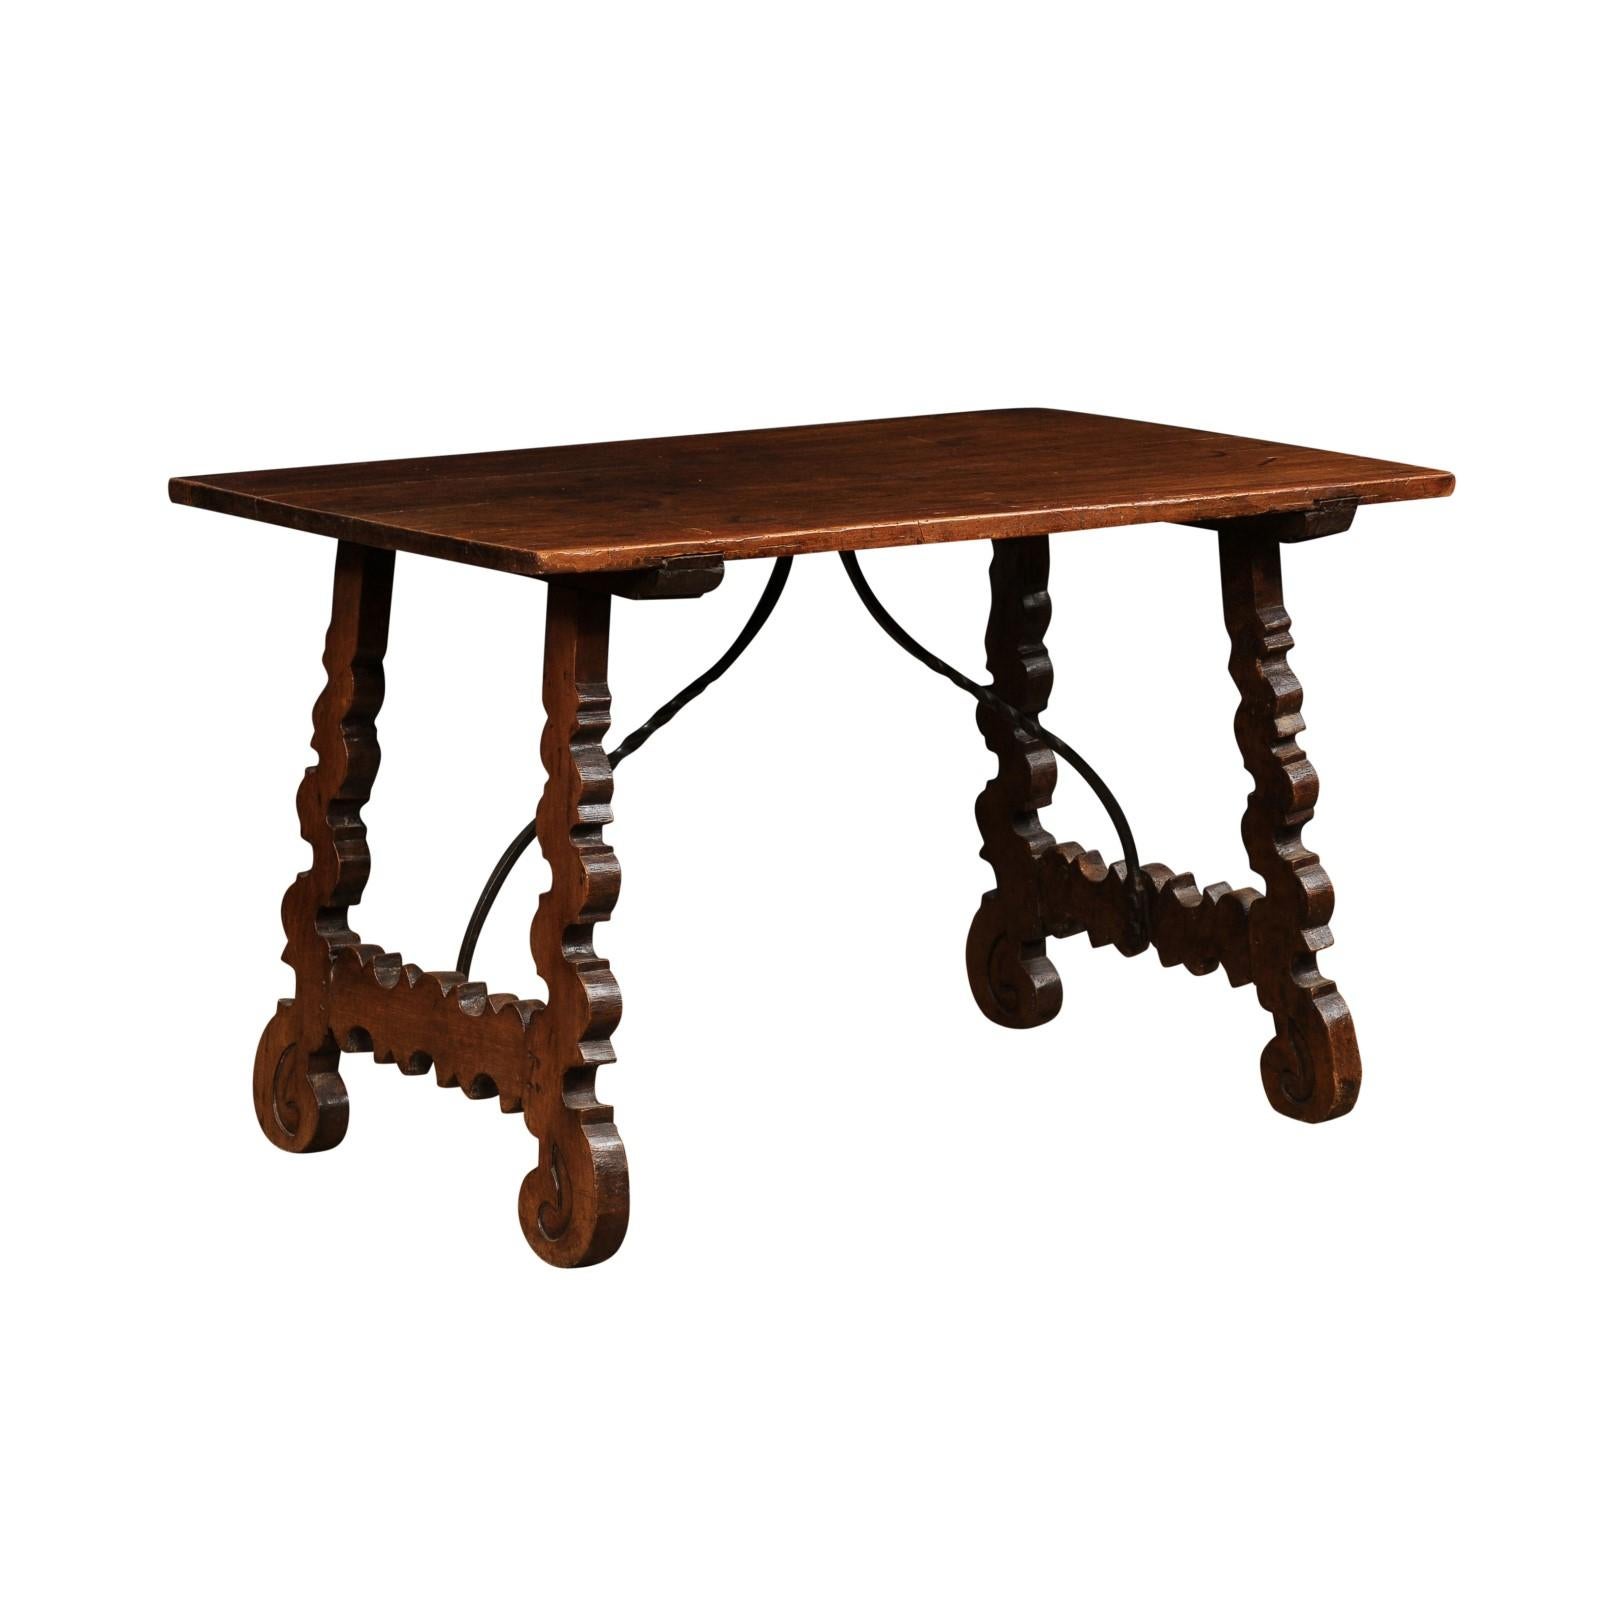 Spanish Baroque Style 19th Century Walnut Fratino Table with Lyre Shaped Base For Sale 6